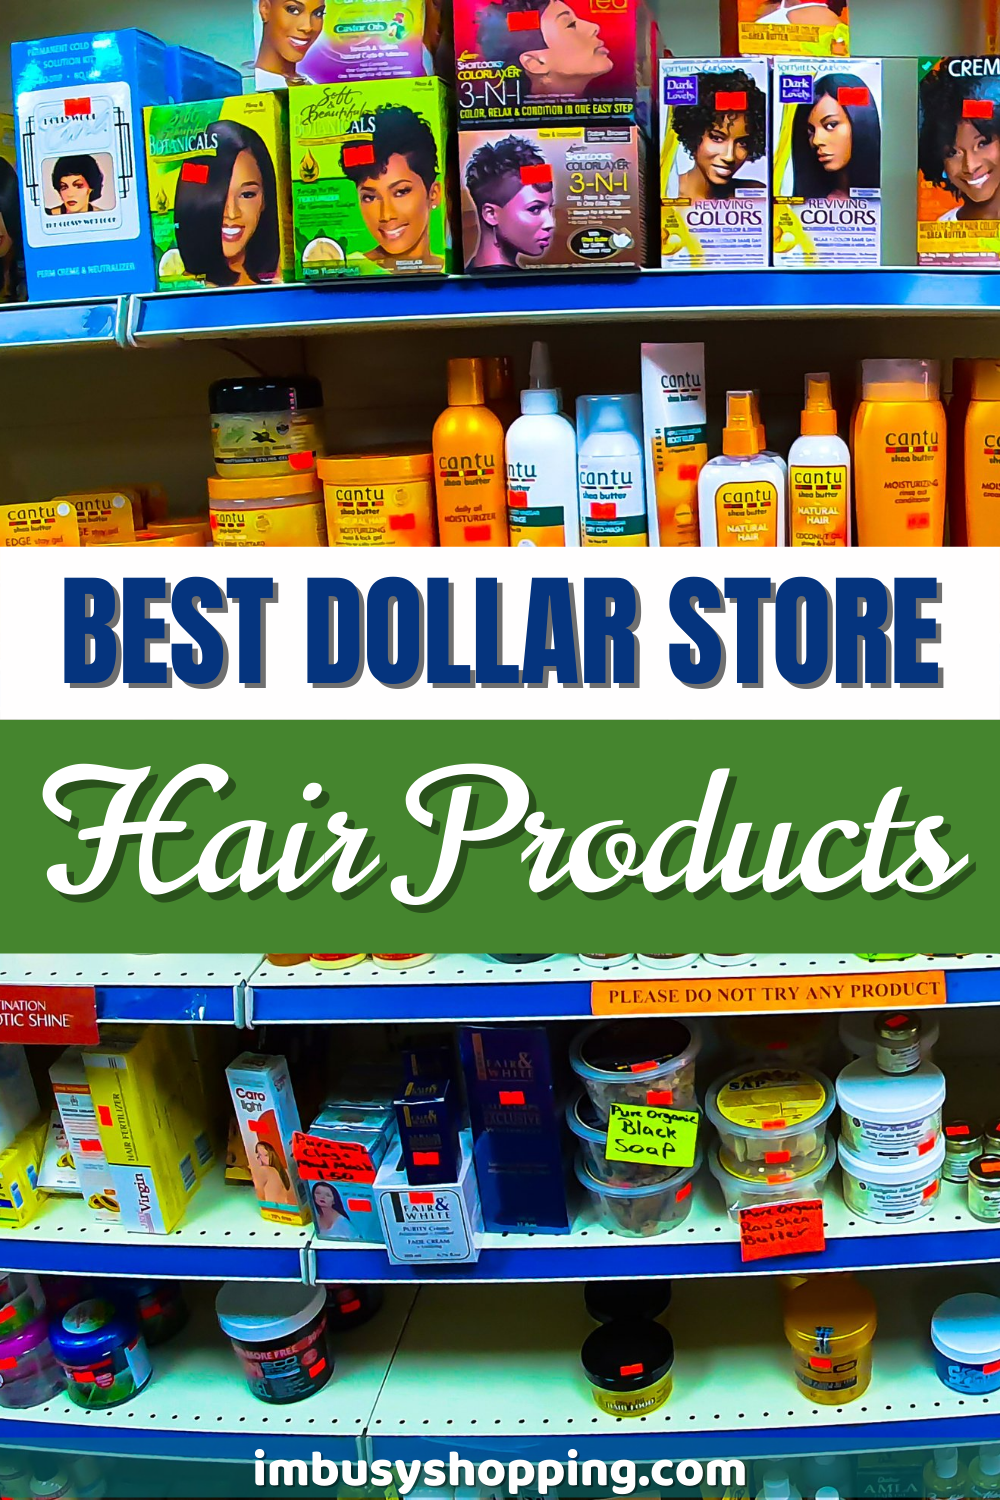 Pin showing the Best Dollar Store Hair Products